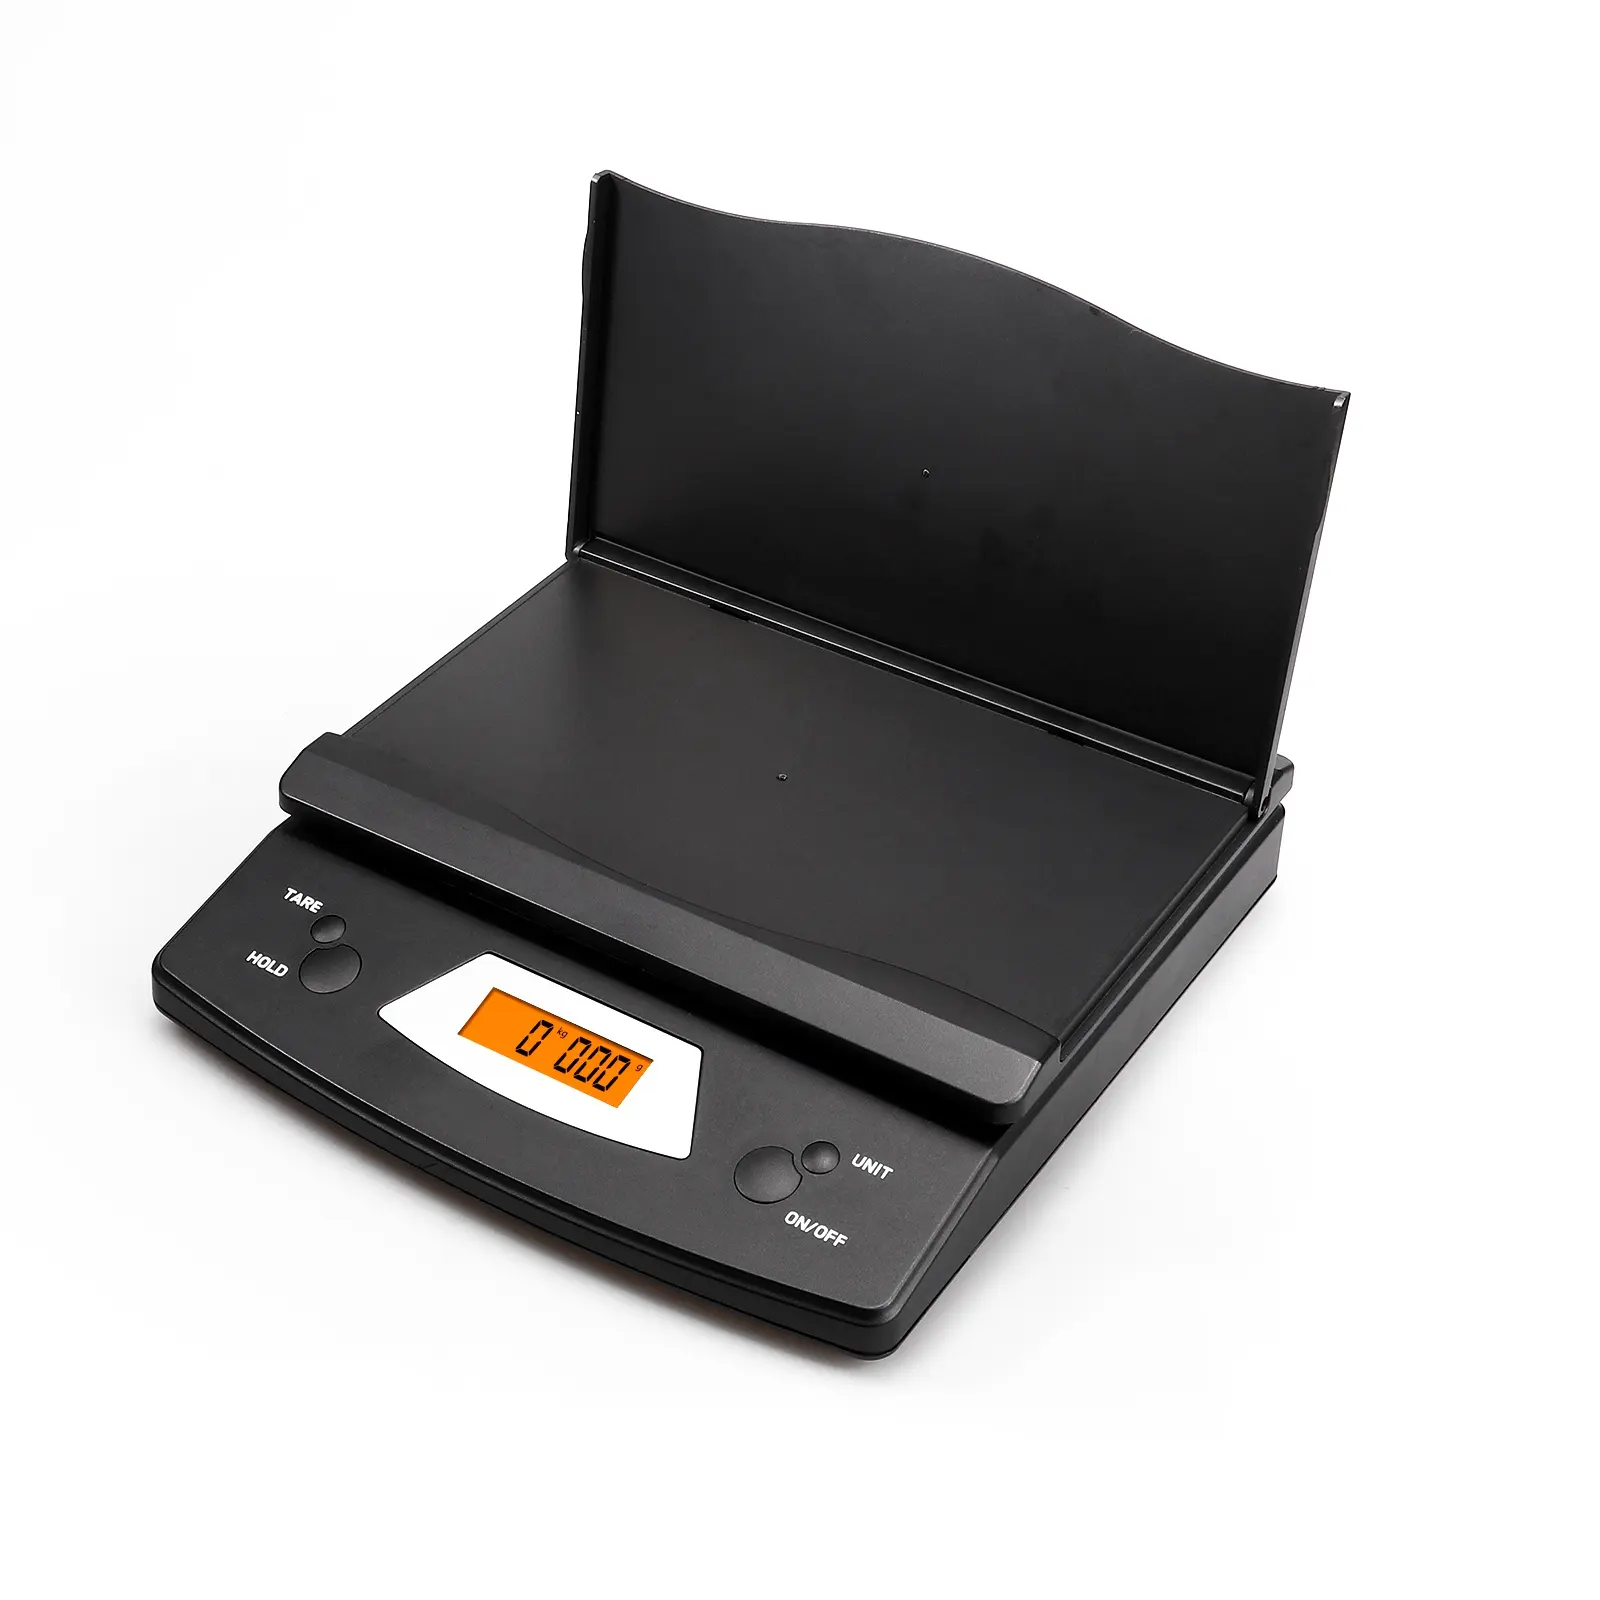 Dimensioning Weight Measuring Machine Digital Weighing Scales for Postal Parcel Luggage for Warehouse Logistic Shipping System